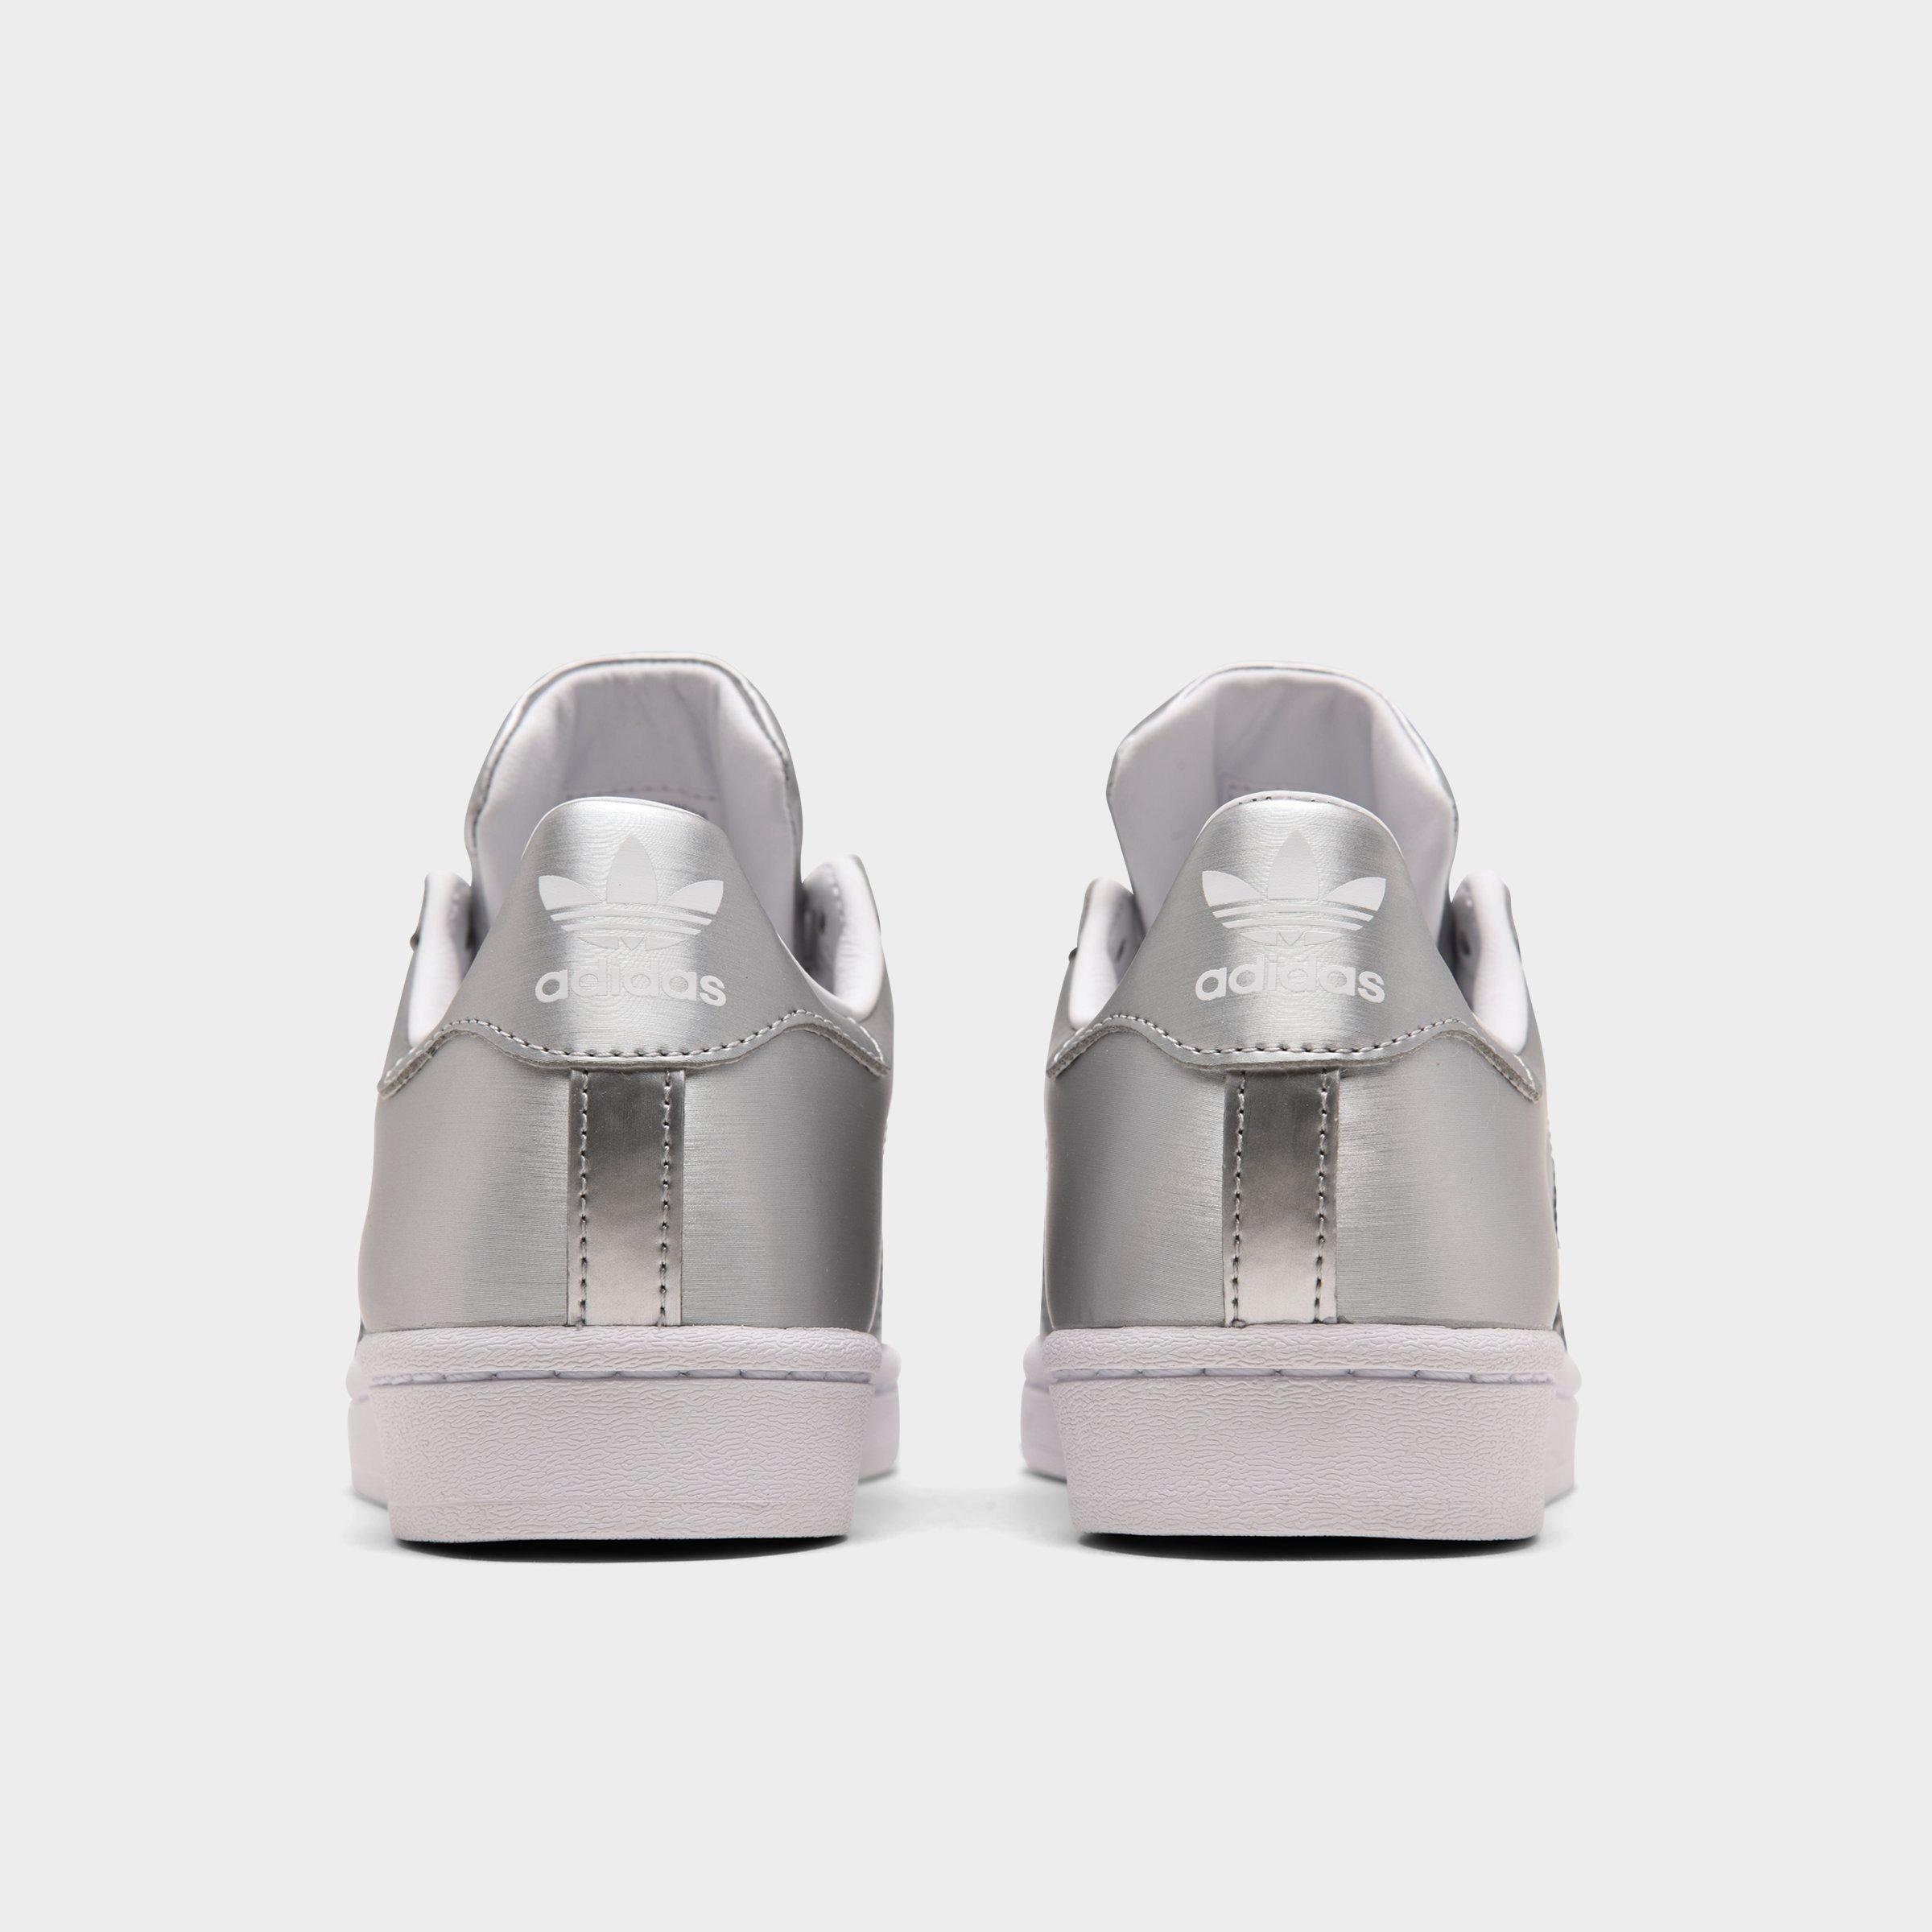 women's originals superstar casual sneakers from finish line